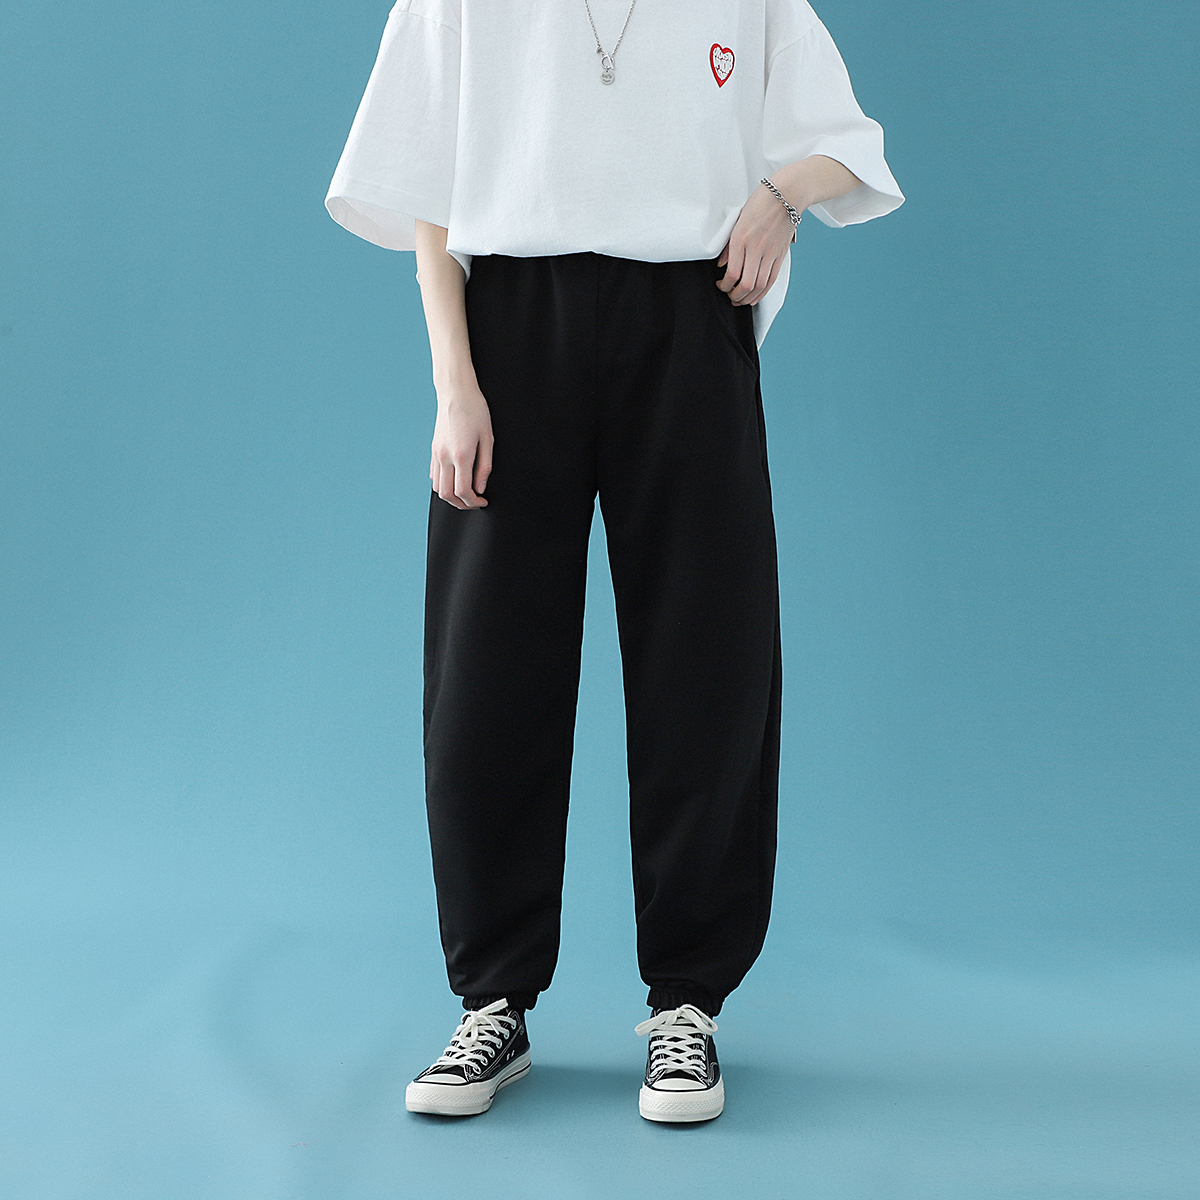 New youth casual pants in spring and summer 2021